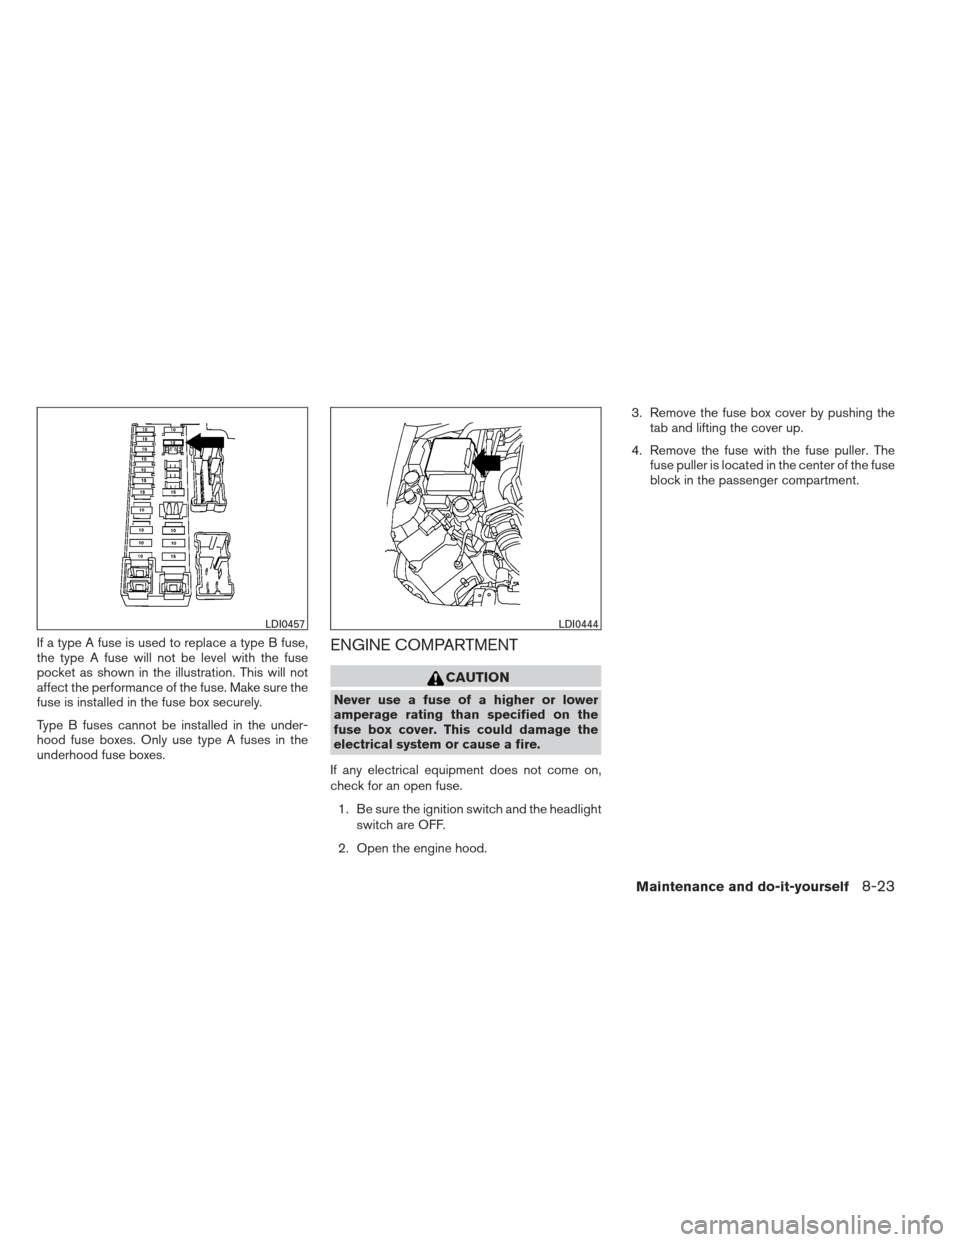 NISSAN XTERRA 2012 N50 / 2.G Owners Guide If a type A fuse is used to replace a type B fuse,
the type A fuse will not be level with the fuse
pocket as shown in the illustration. This will not
affect the performance of the fuse. Make sure the
